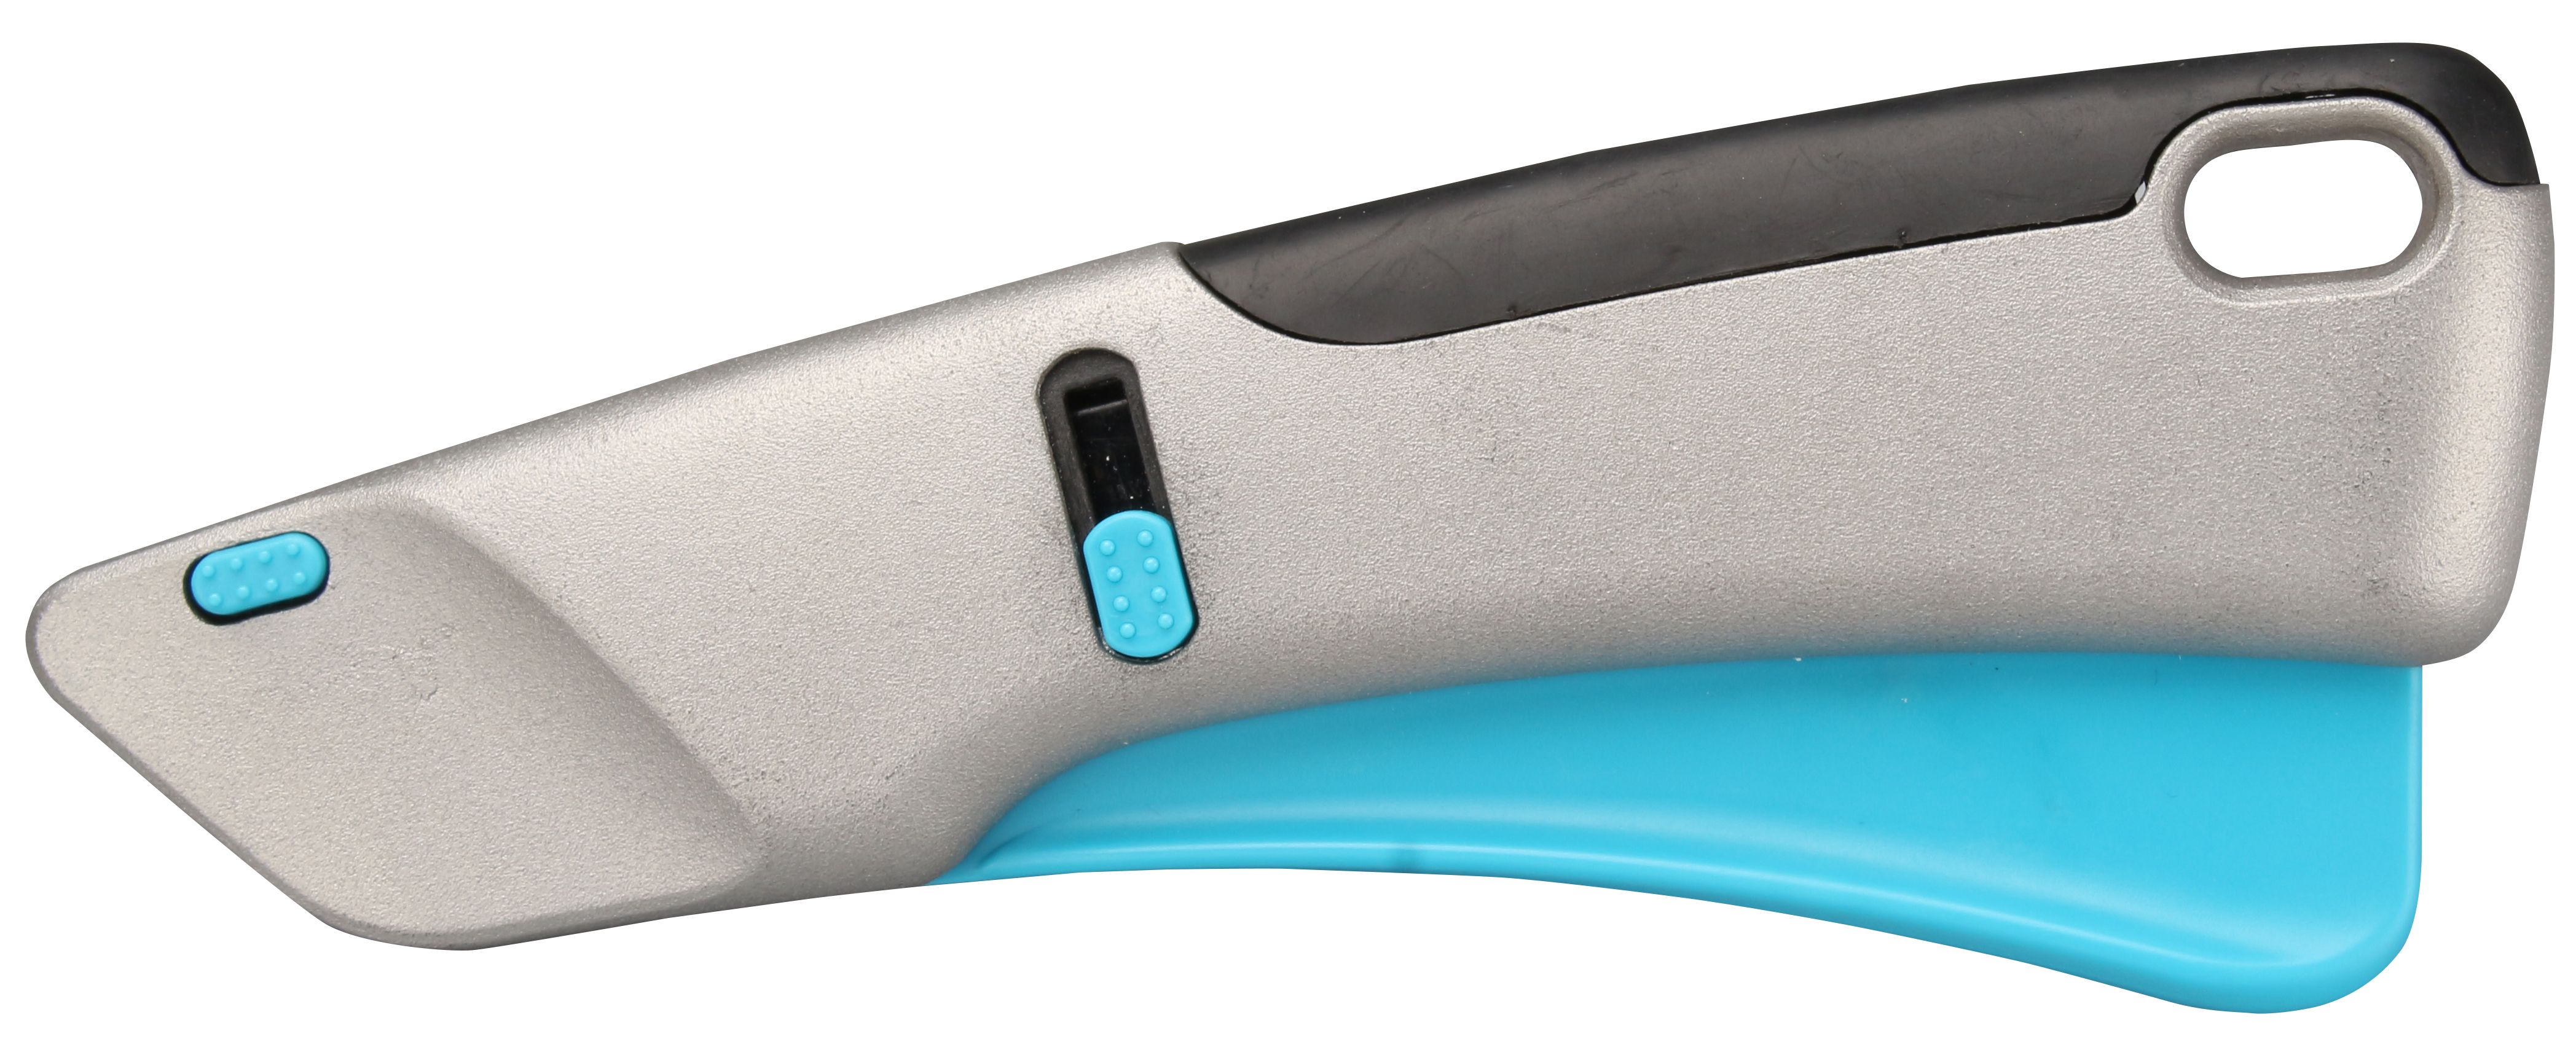 Auto-Retractable Squeeze-Trigger Utility Knife - Trading Solutions  Worldwide, Inc